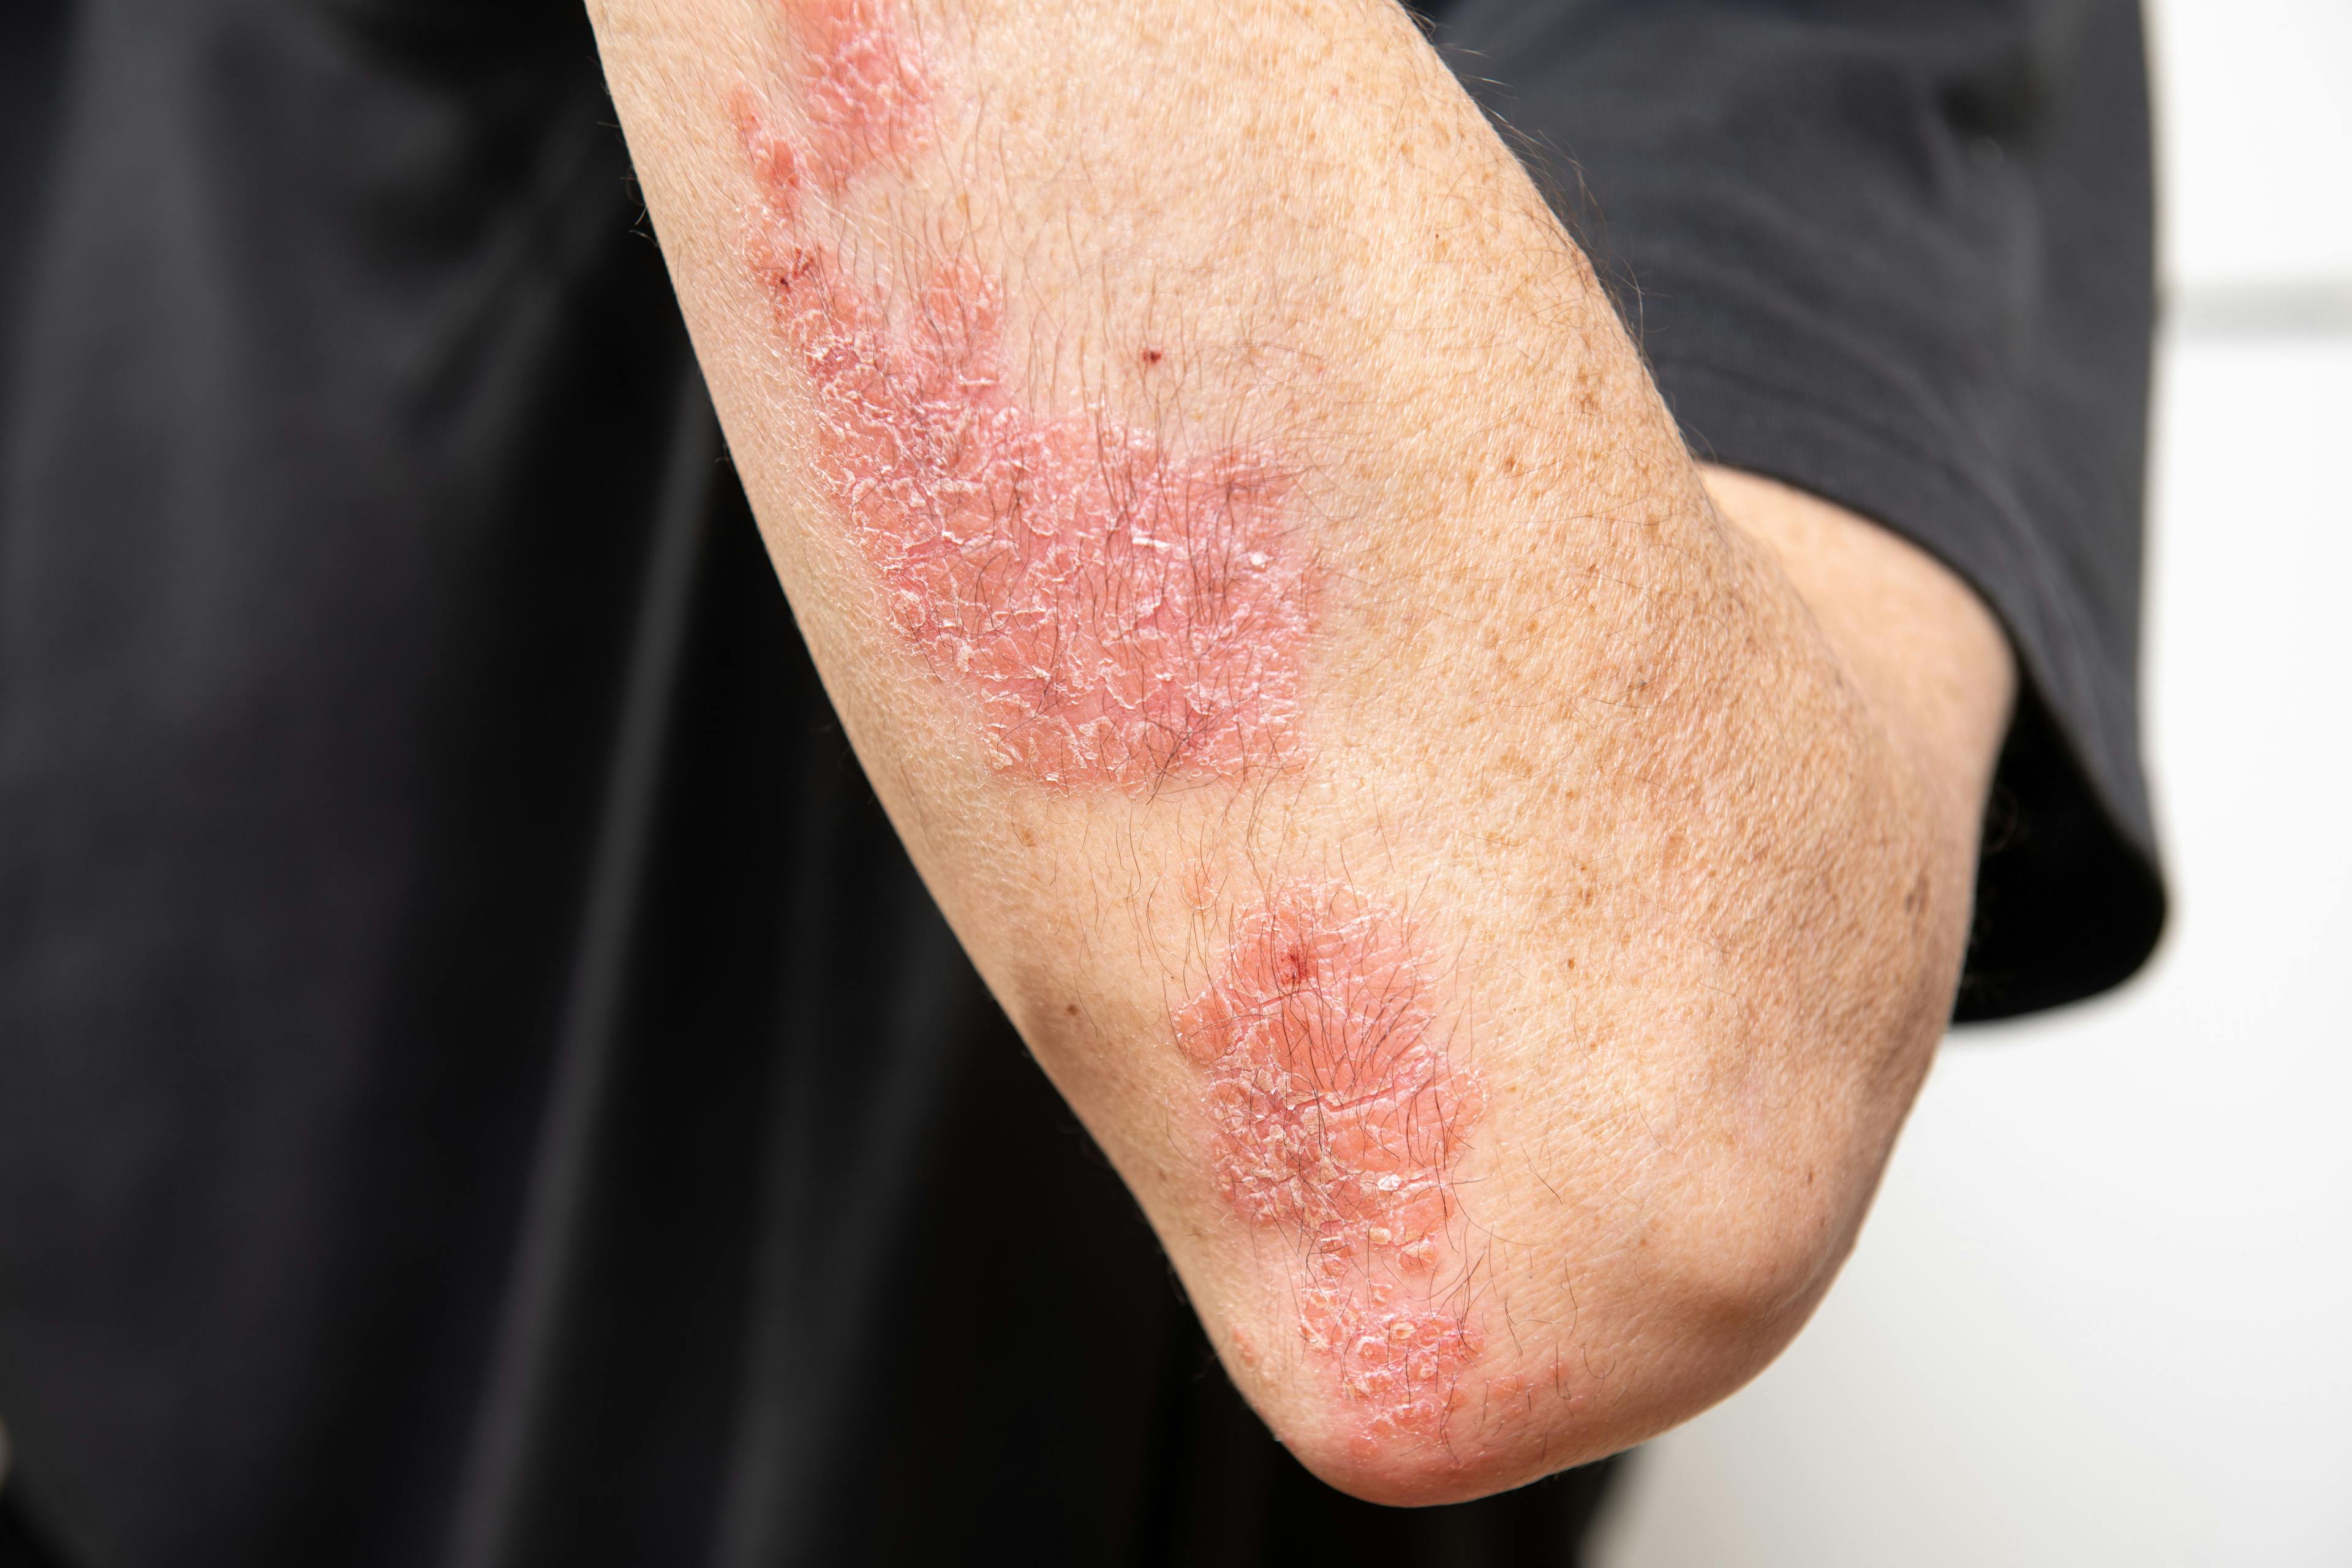 Real-World Cohort Study to Compare Efficacy and Safety of Adalimumab Biosimilars for Psoriasis